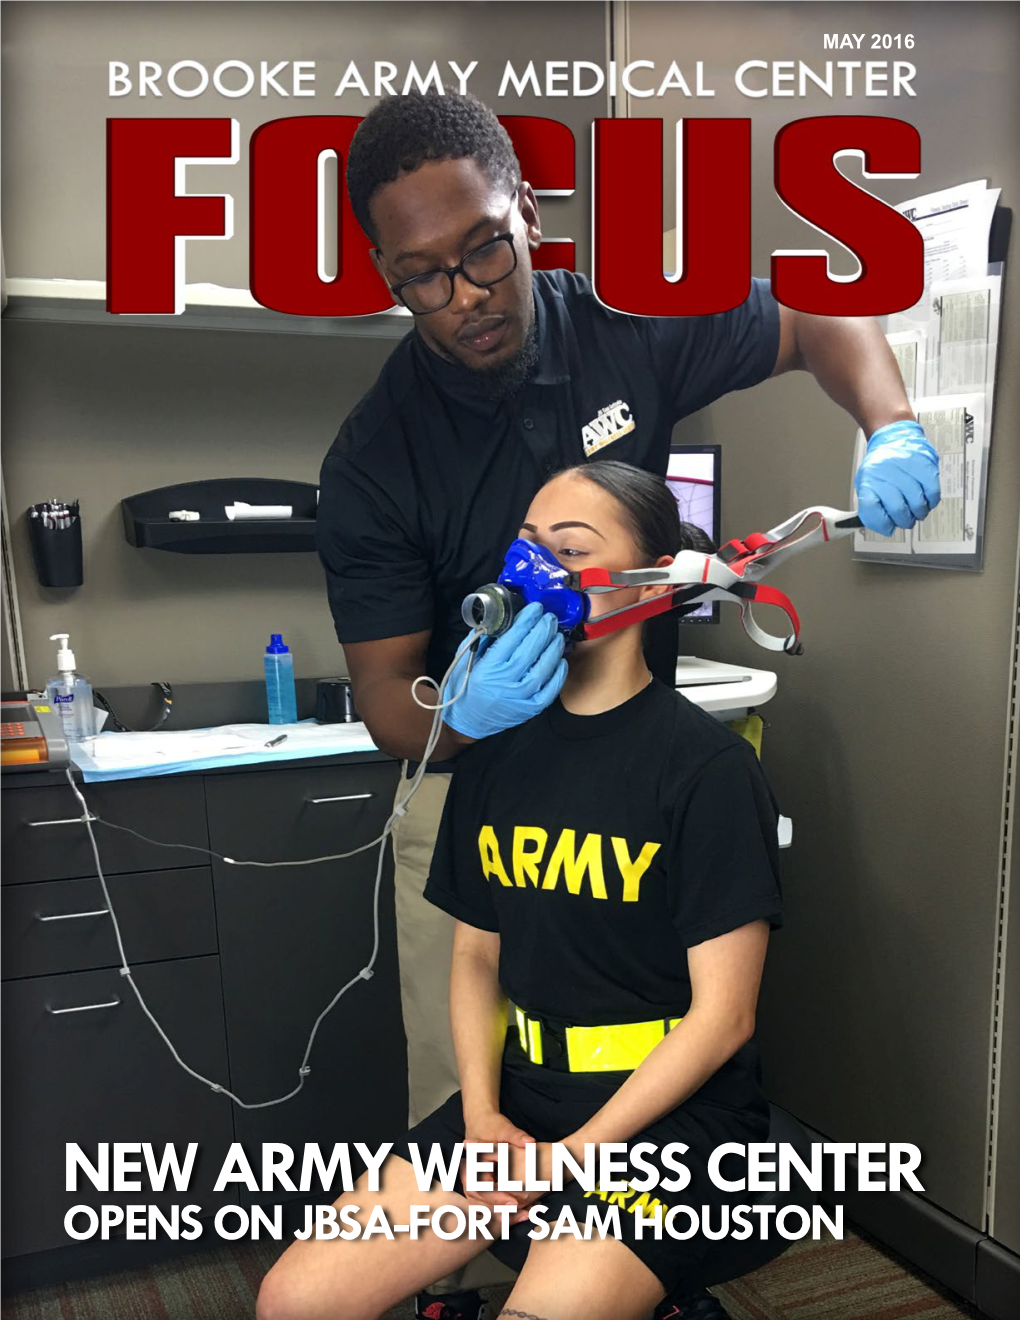 New Army Wellness Center Opens on JBSA-Fort Sam Houston INSIDE THIS ISSUE